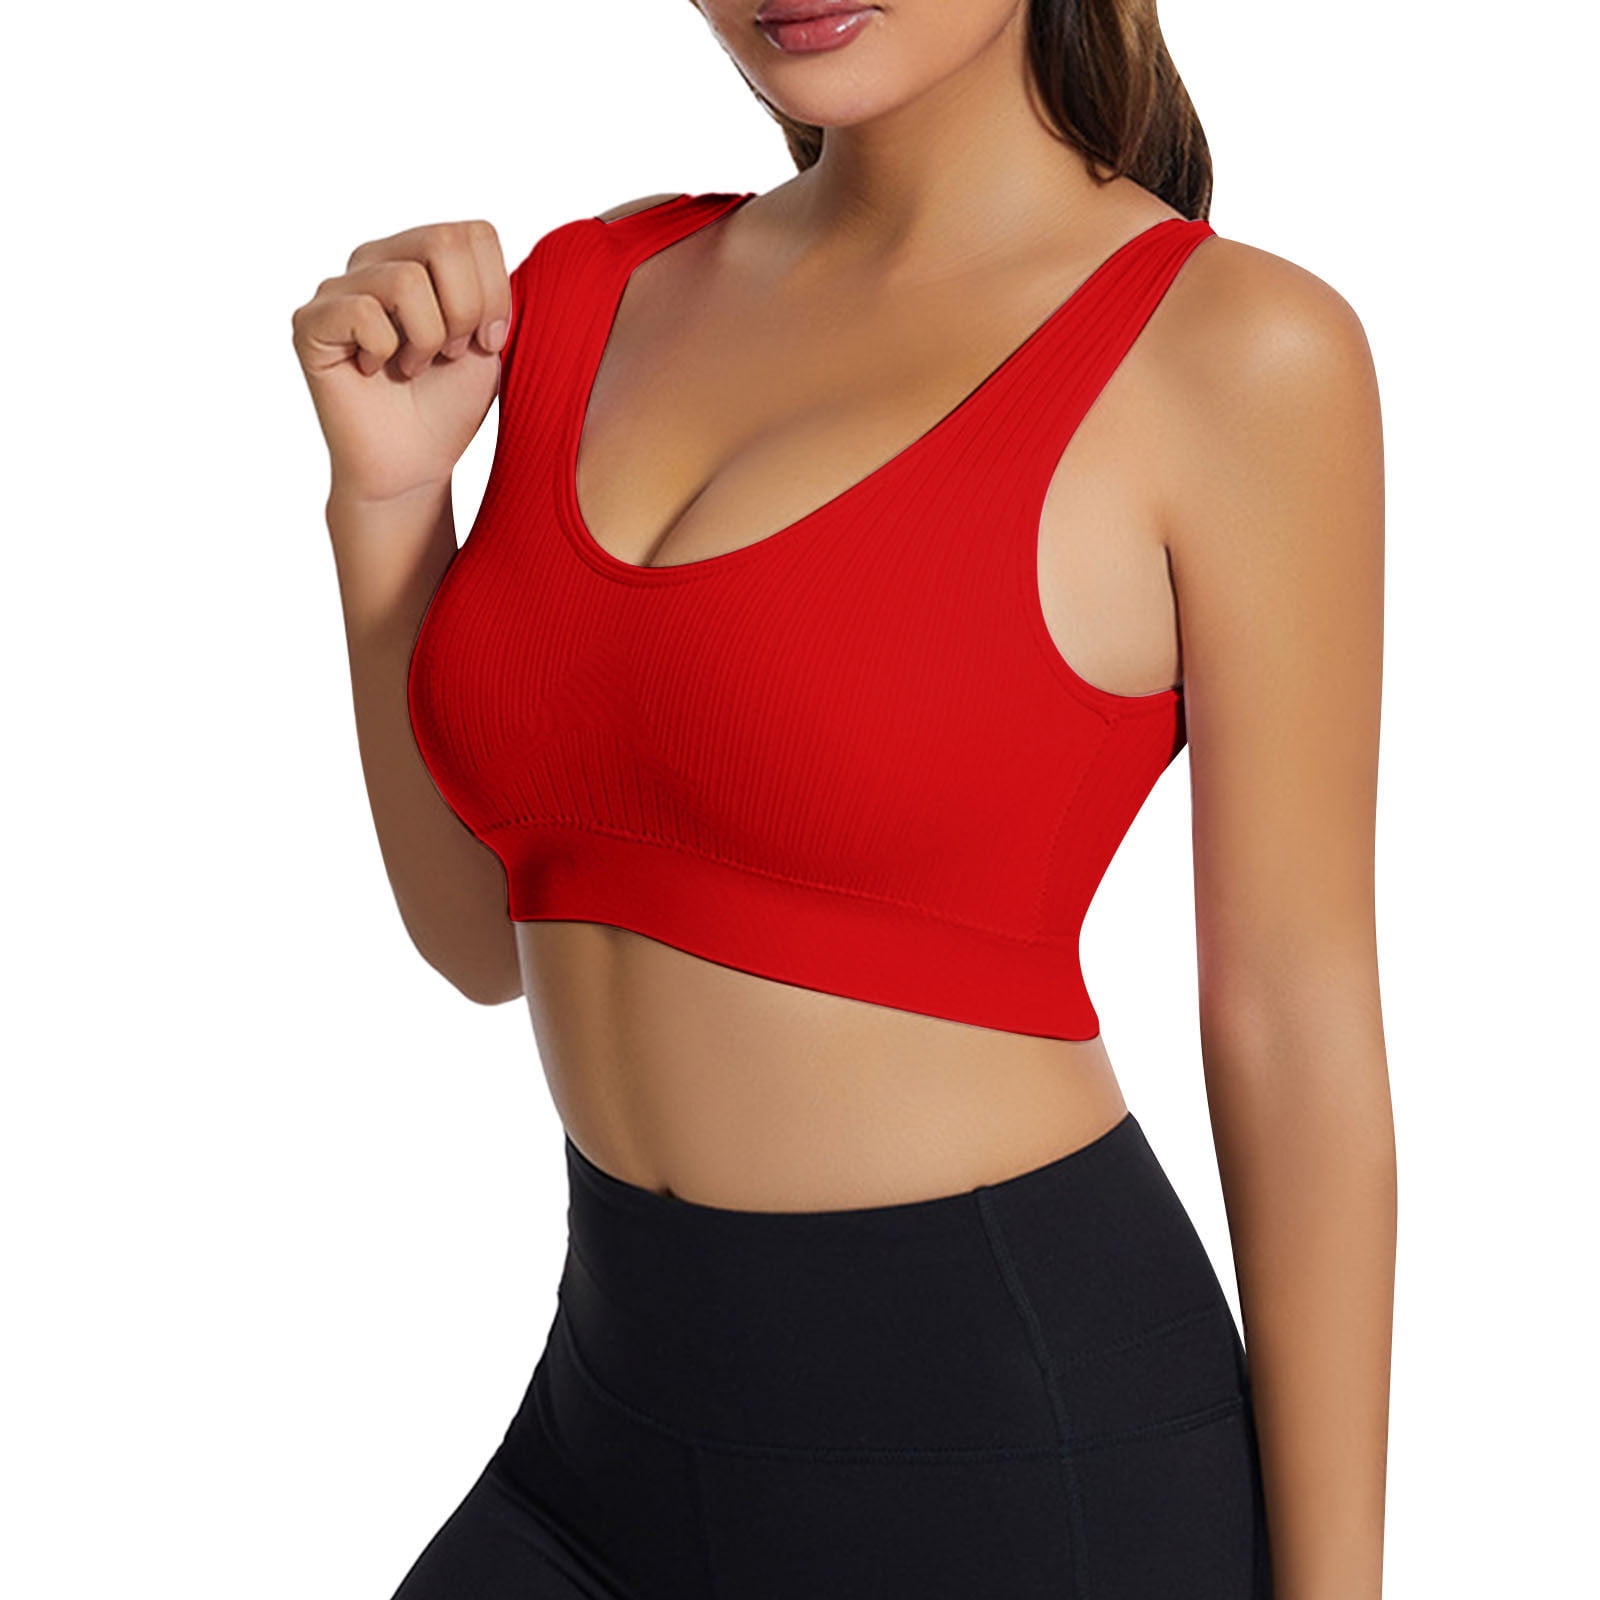 CAICJ98 Lingerie for Women Yoga Tank Tops for Women Built in Shelf Bra B/C  Cups Strappy Back Activewear Workout Compression Tops Red,4XL 